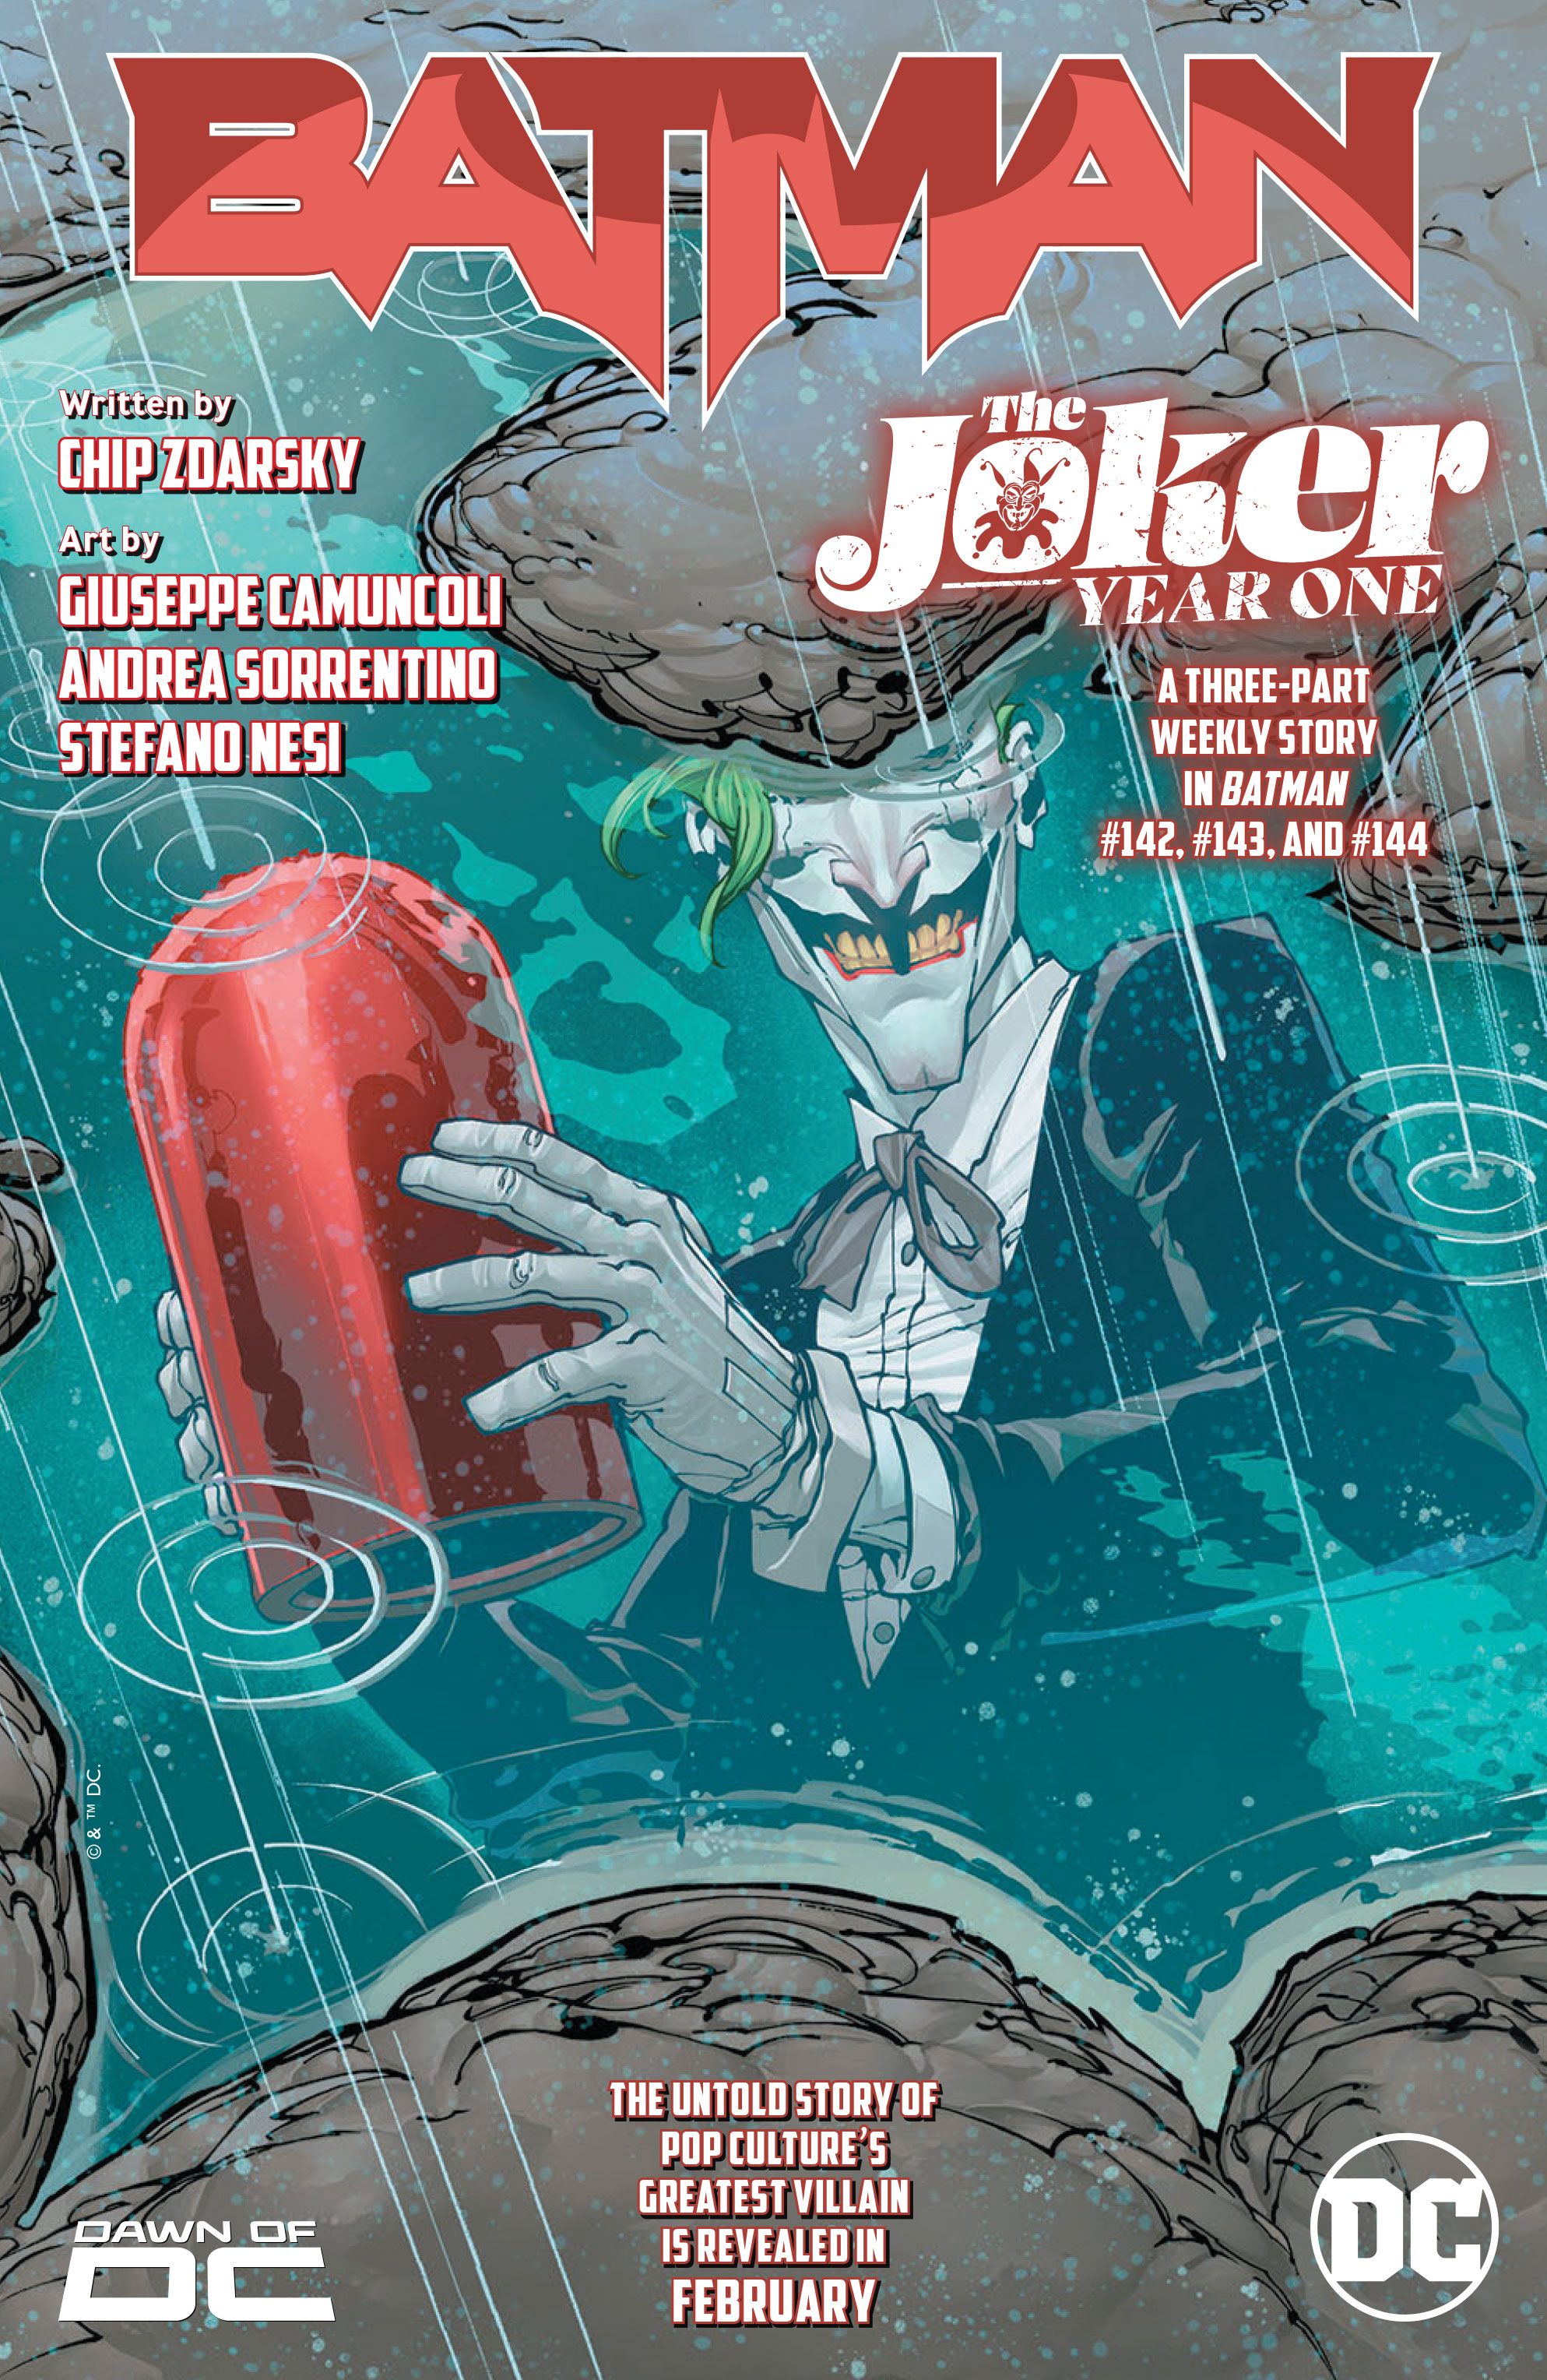 cover for Batman #142, Joker holds the original Red Hood mask, reflected in a bat-symbol shaped puddle